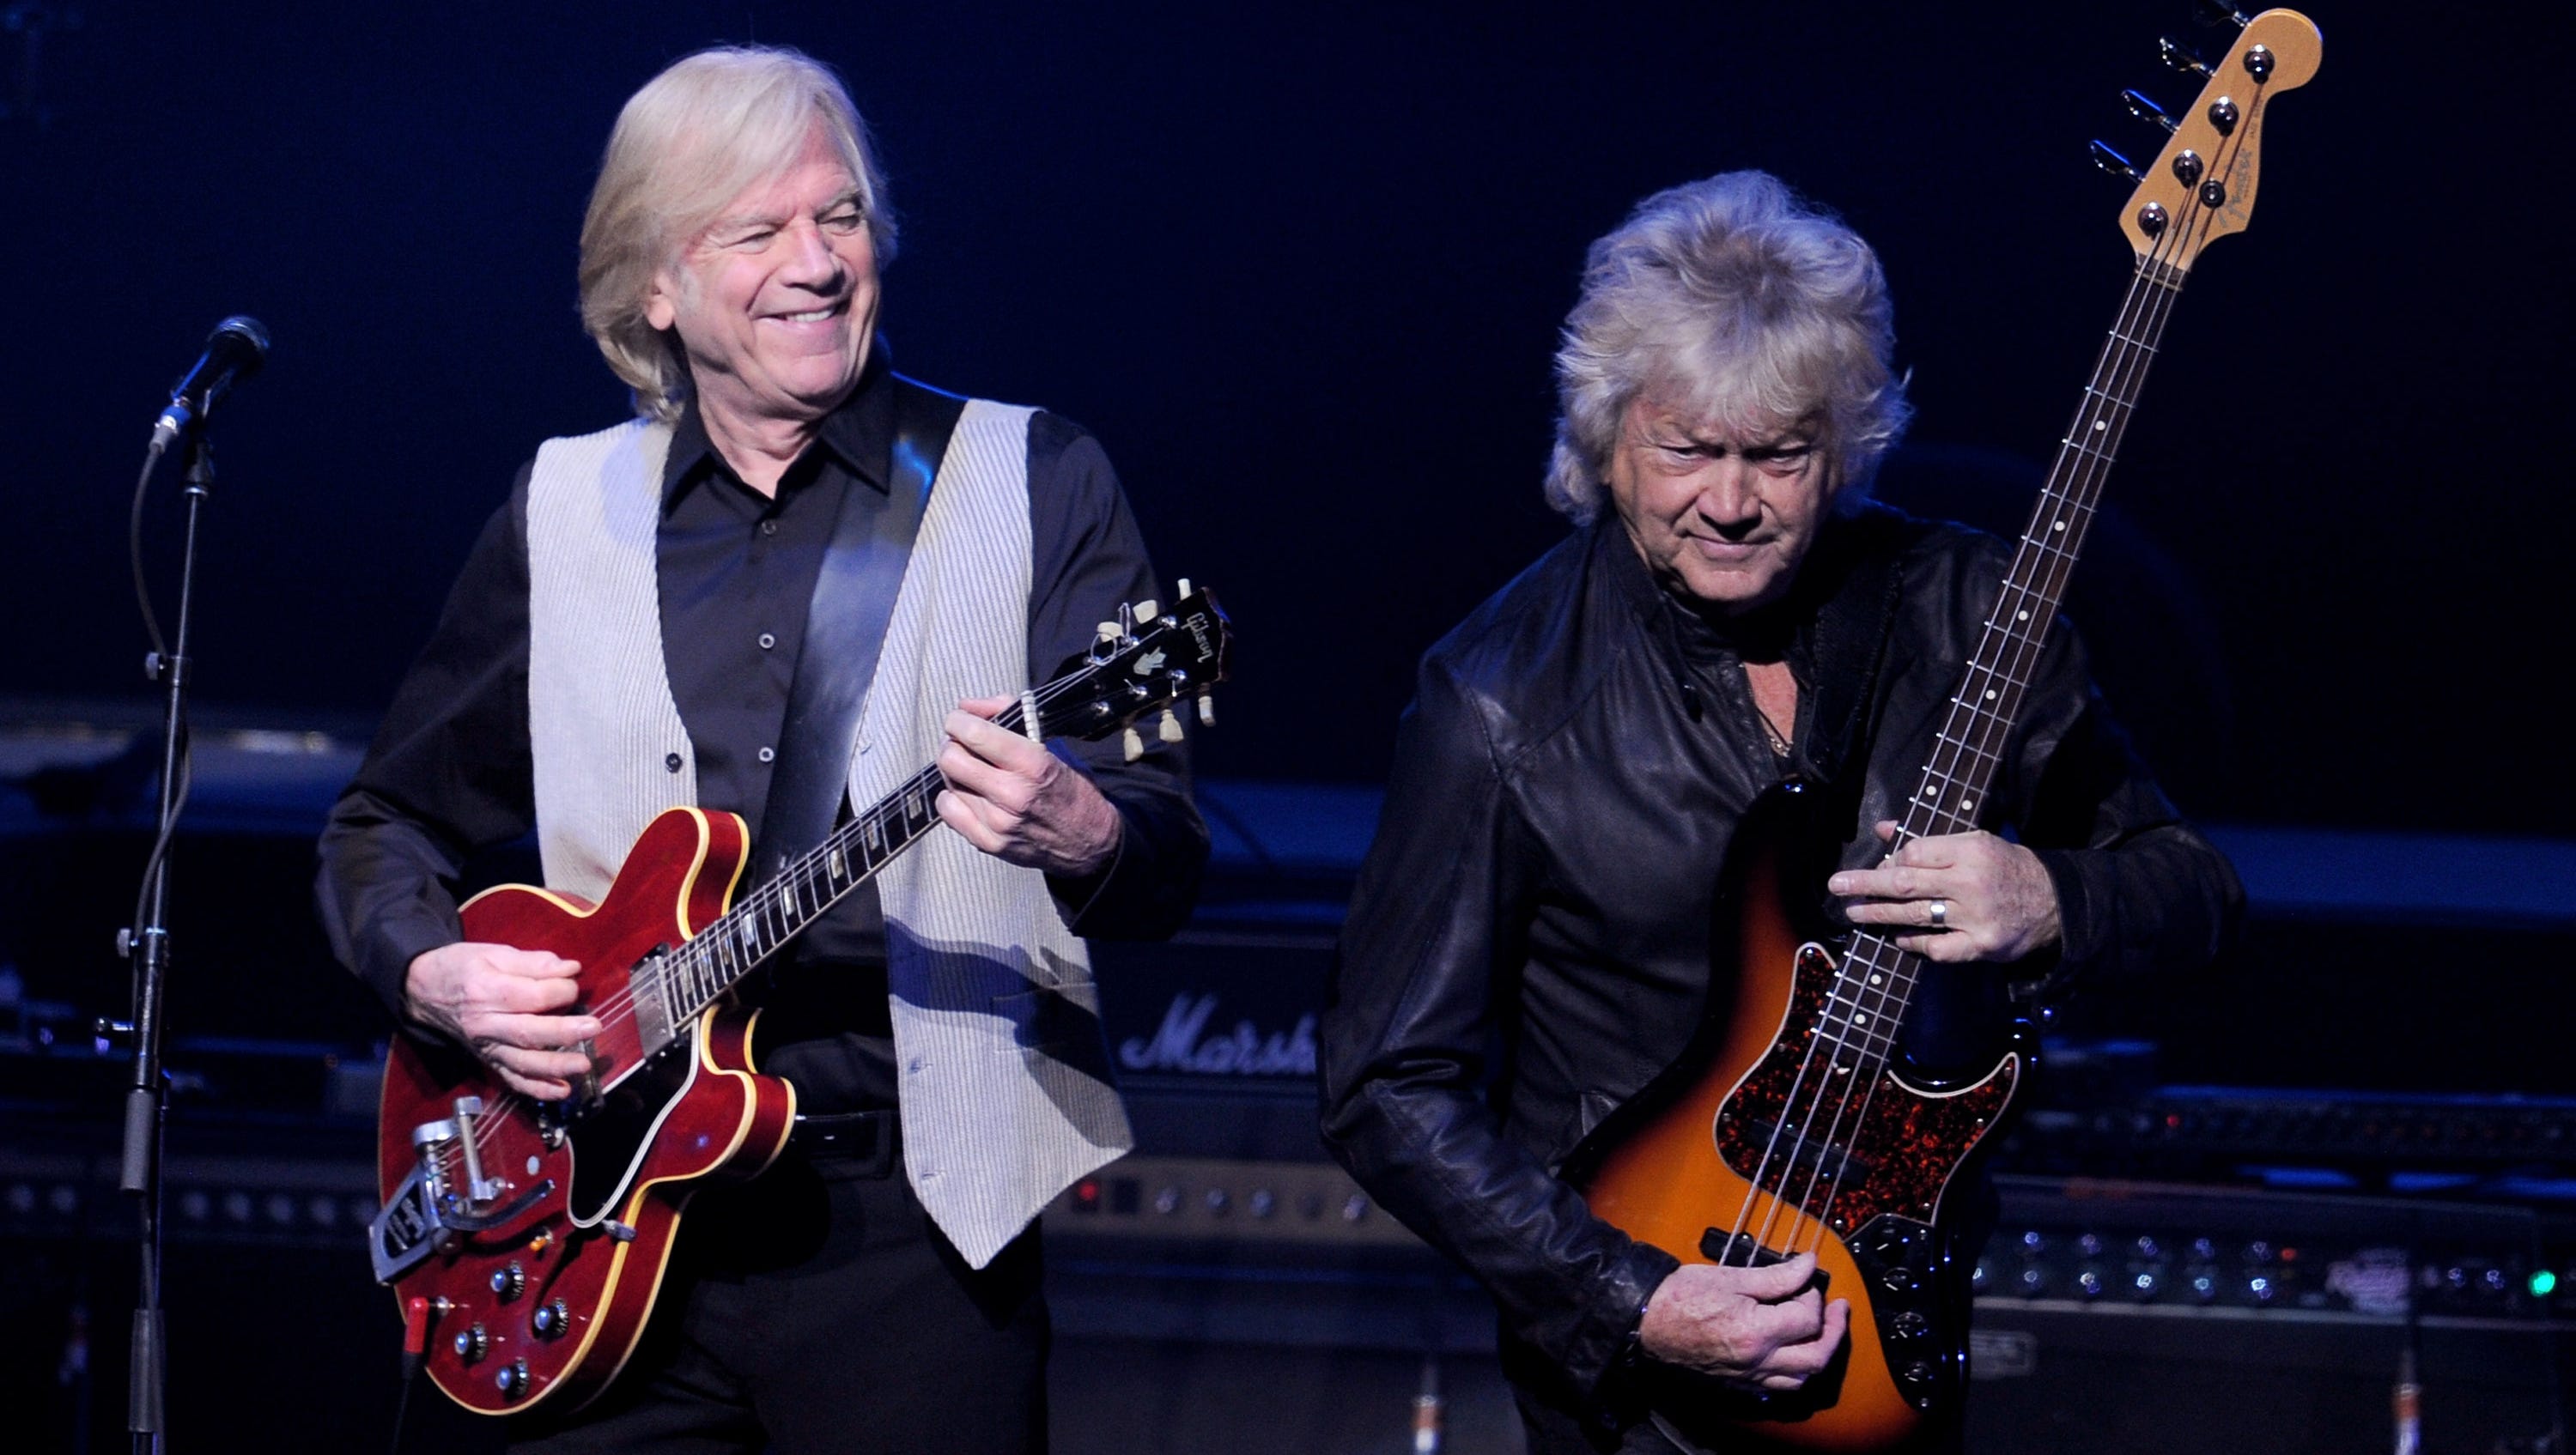 Moody Blues return to desert to launch 'Days of Future Passed' 50th  anniversary tour